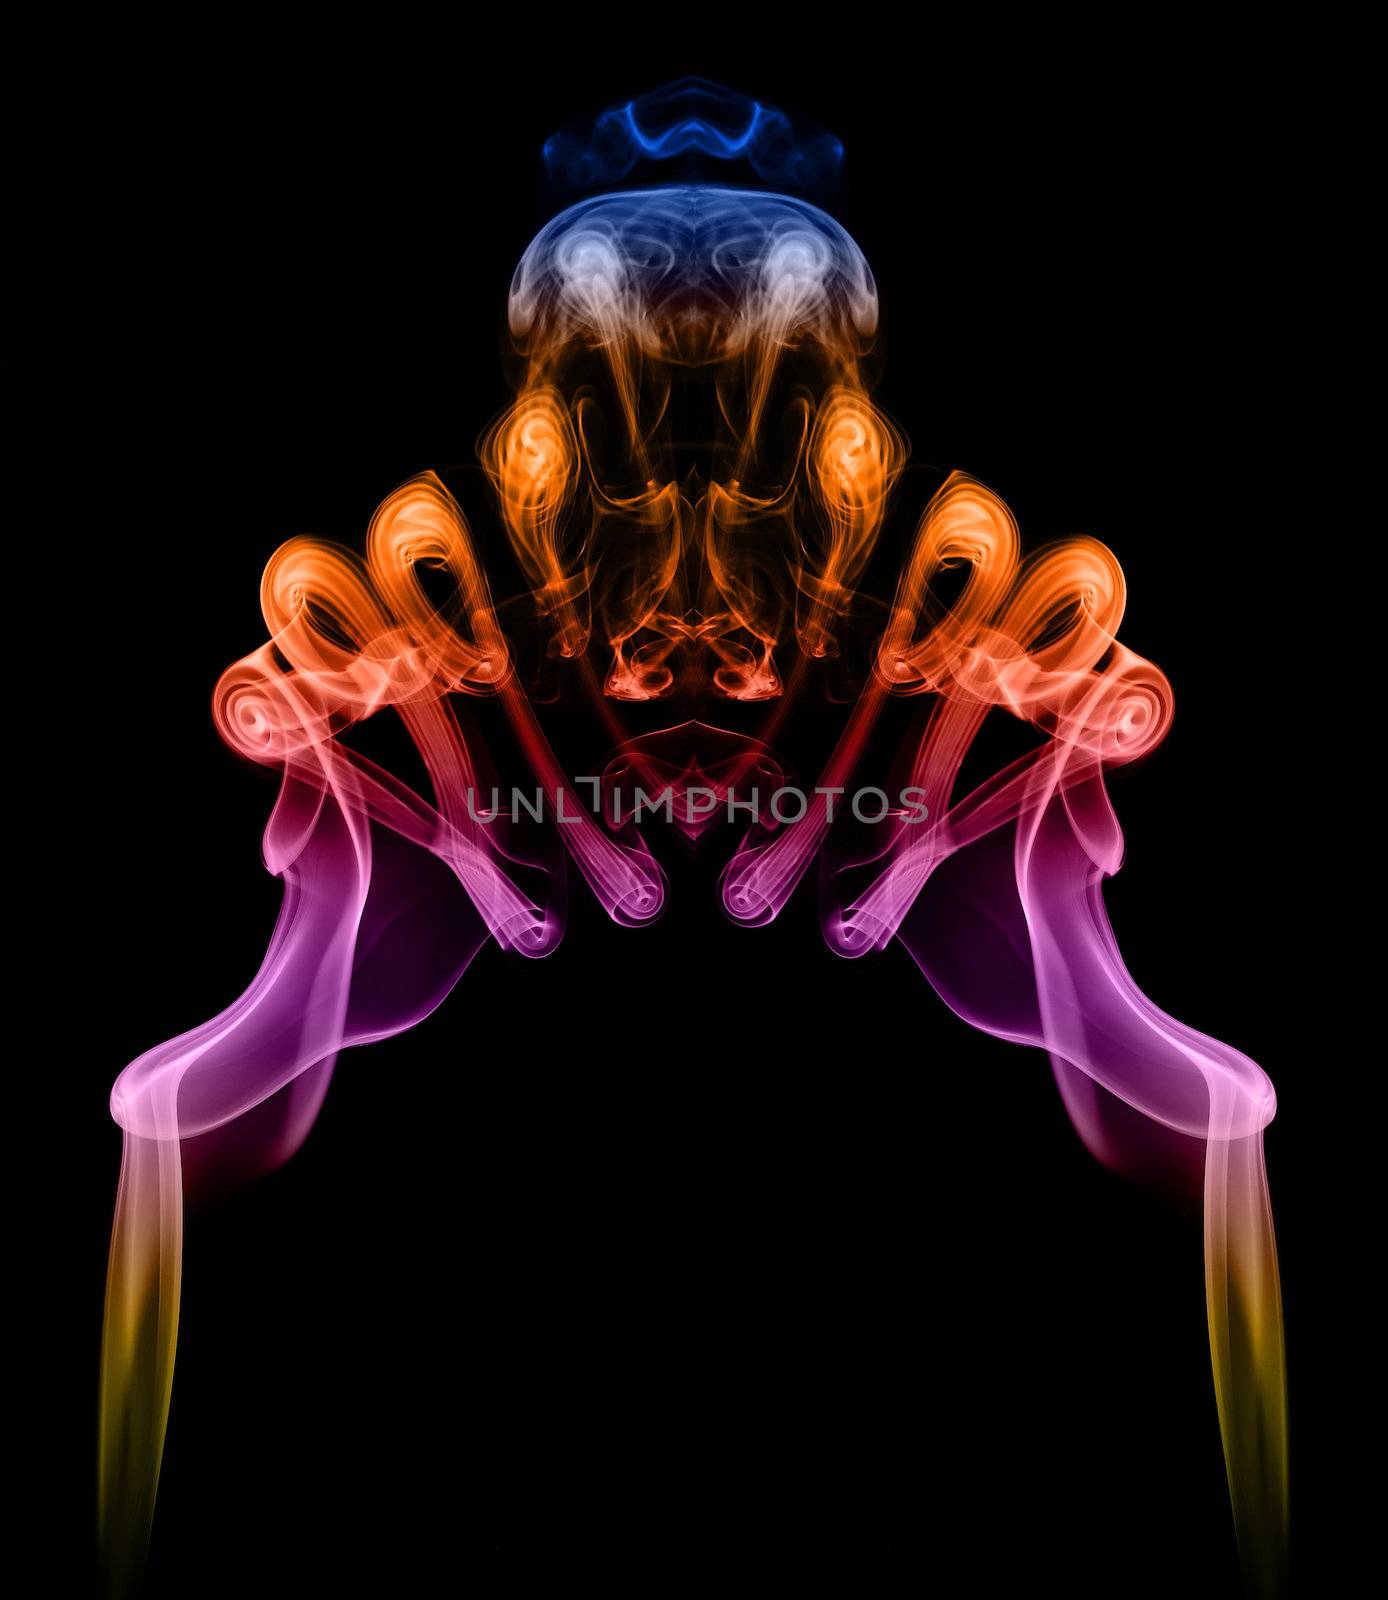 Symmetric colorful pattern created with smoke, it can be used well as an abstract background or blend.